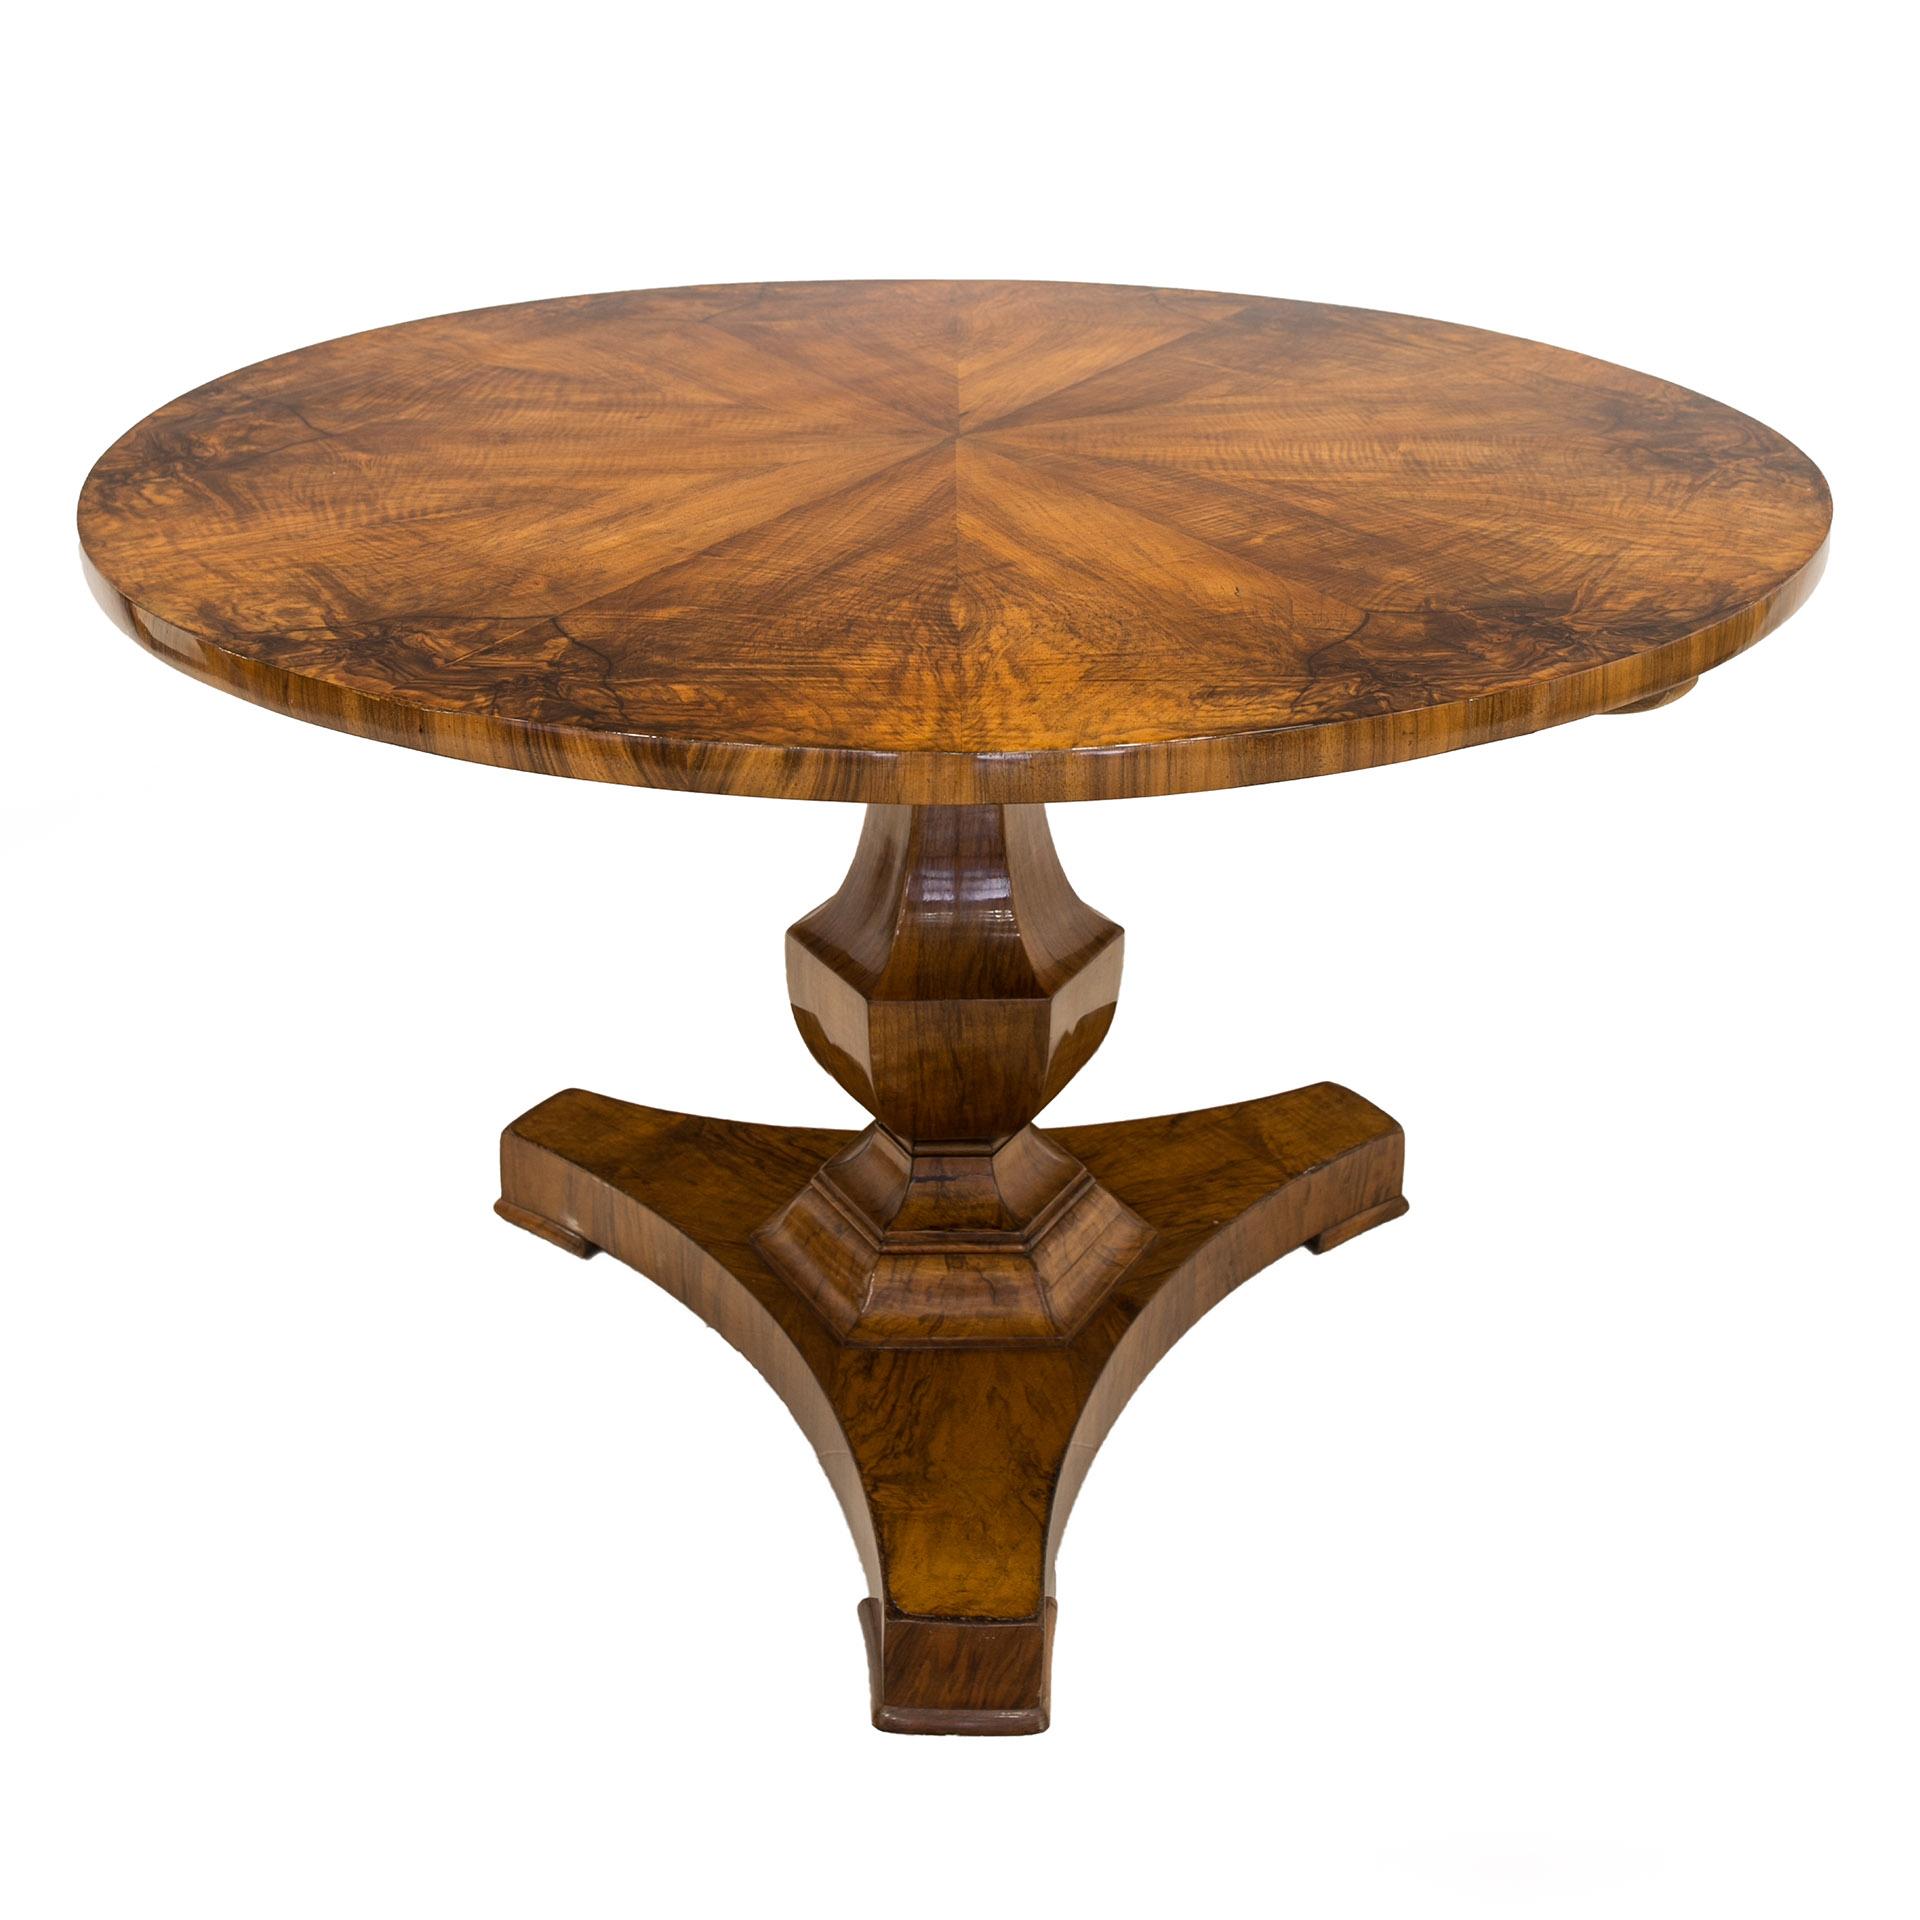 This Biedermeier round table comes from Germany and was made around early 19th century. It is supported on one solid, beautifully shaped leg made of walnut wood. The tabletop is veneered with 12 parts of walnut wood with extraordinary wood patterns.